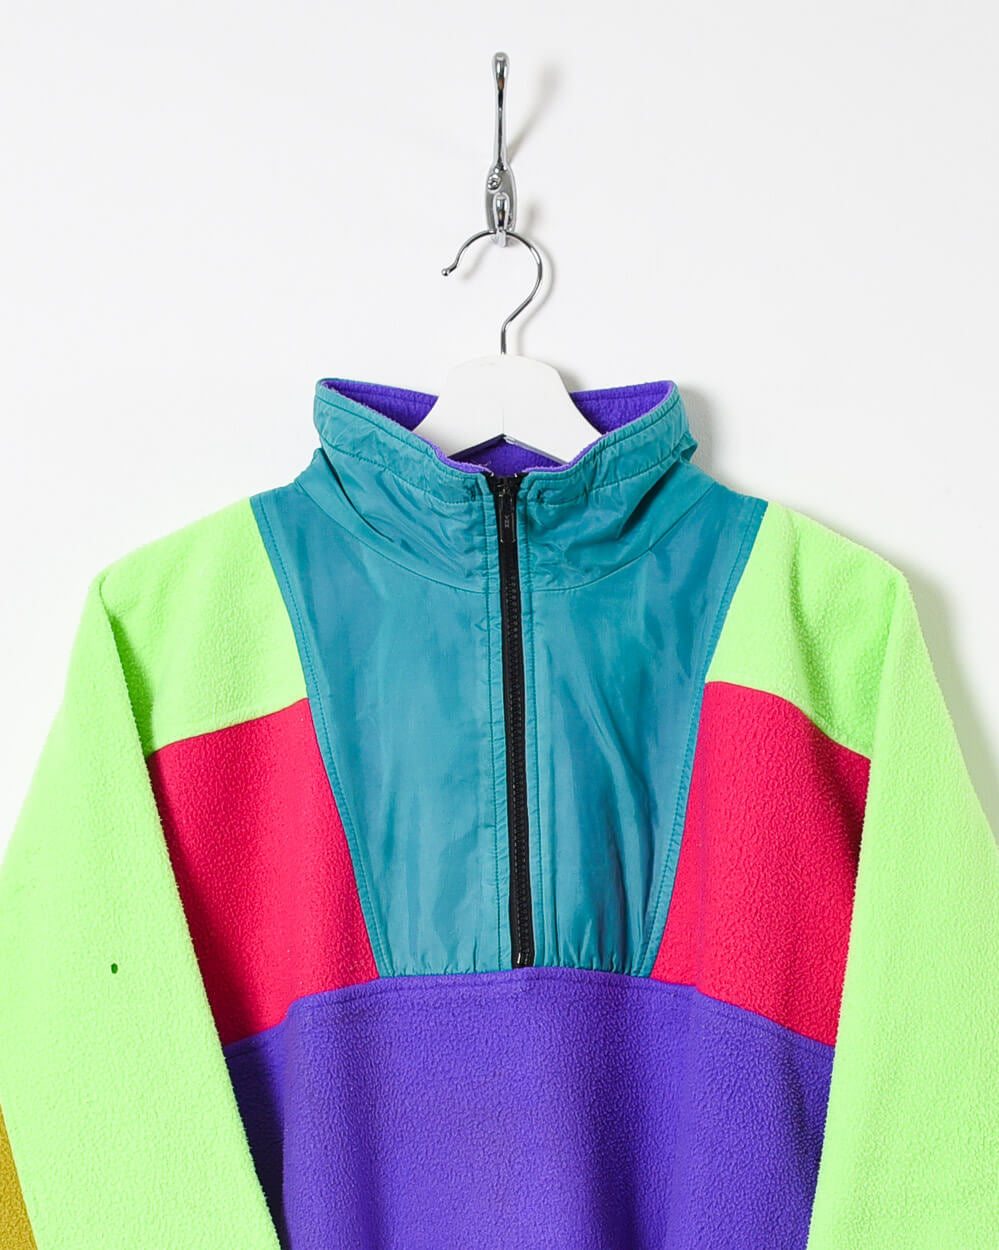 Spring Tonic 1/2 Zip Fleece - X-Large - Domno Vintage 90s, 80s, 00s Retro and Vintage Clothing 